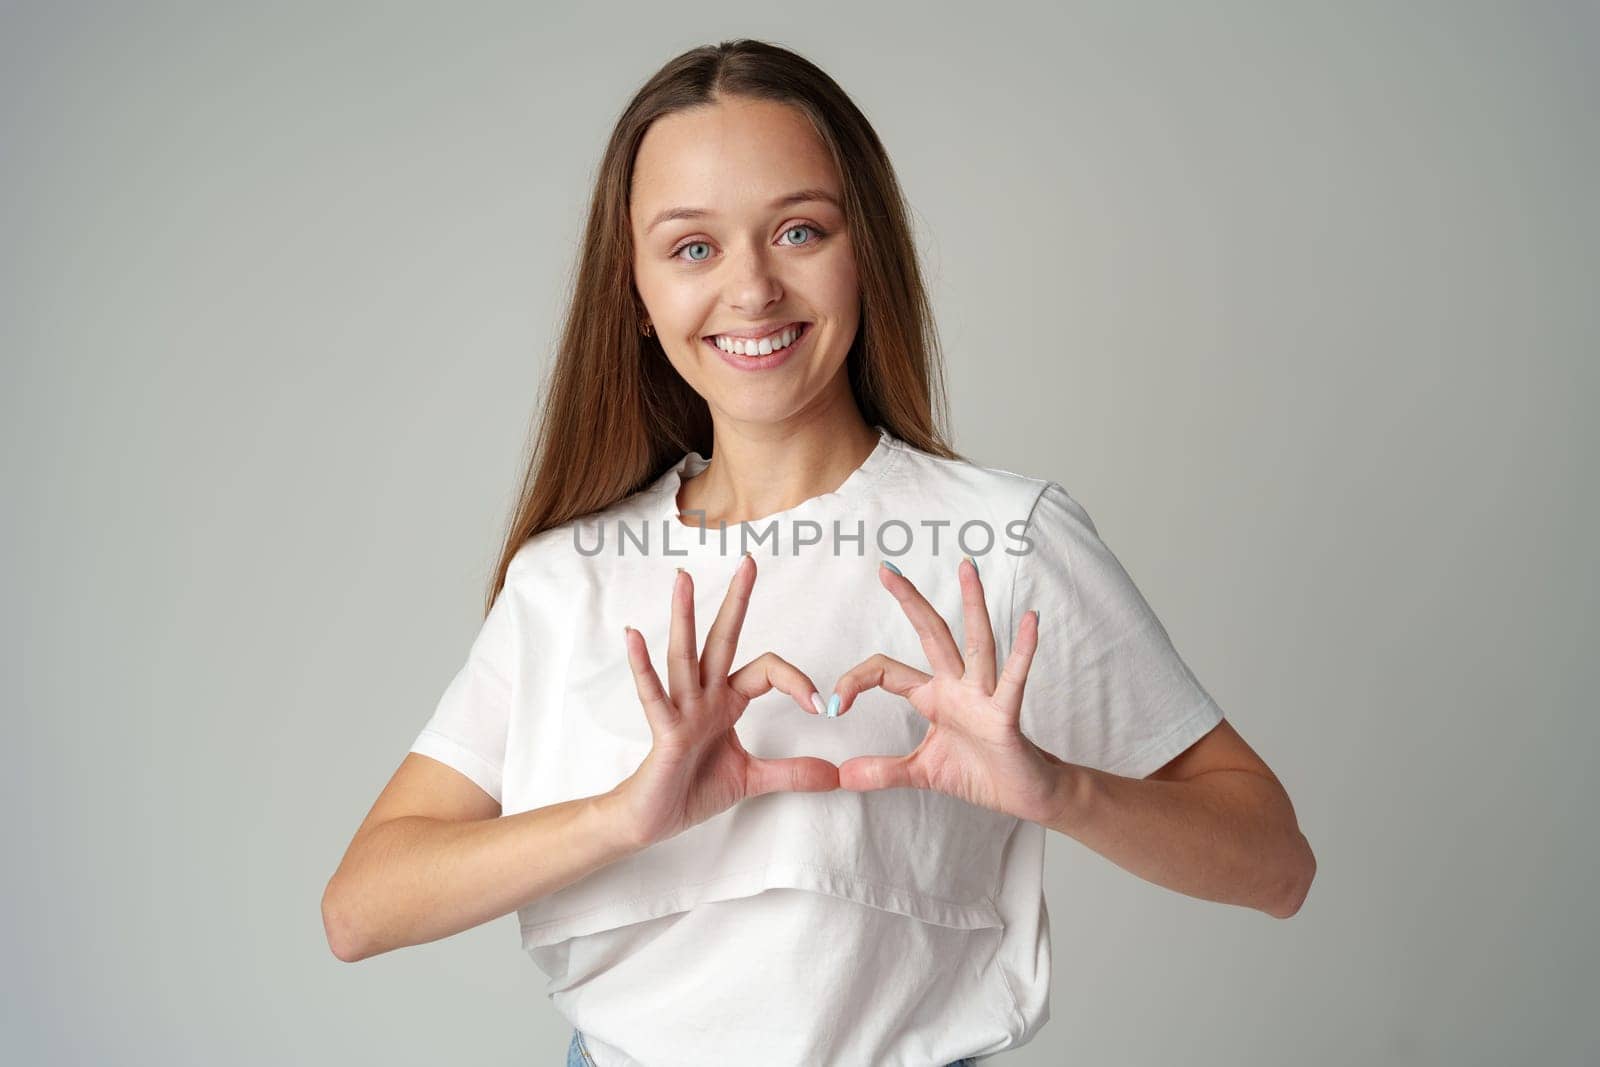 Smiling young woman showing heart sign with hands on gray background by Fabrikasimf